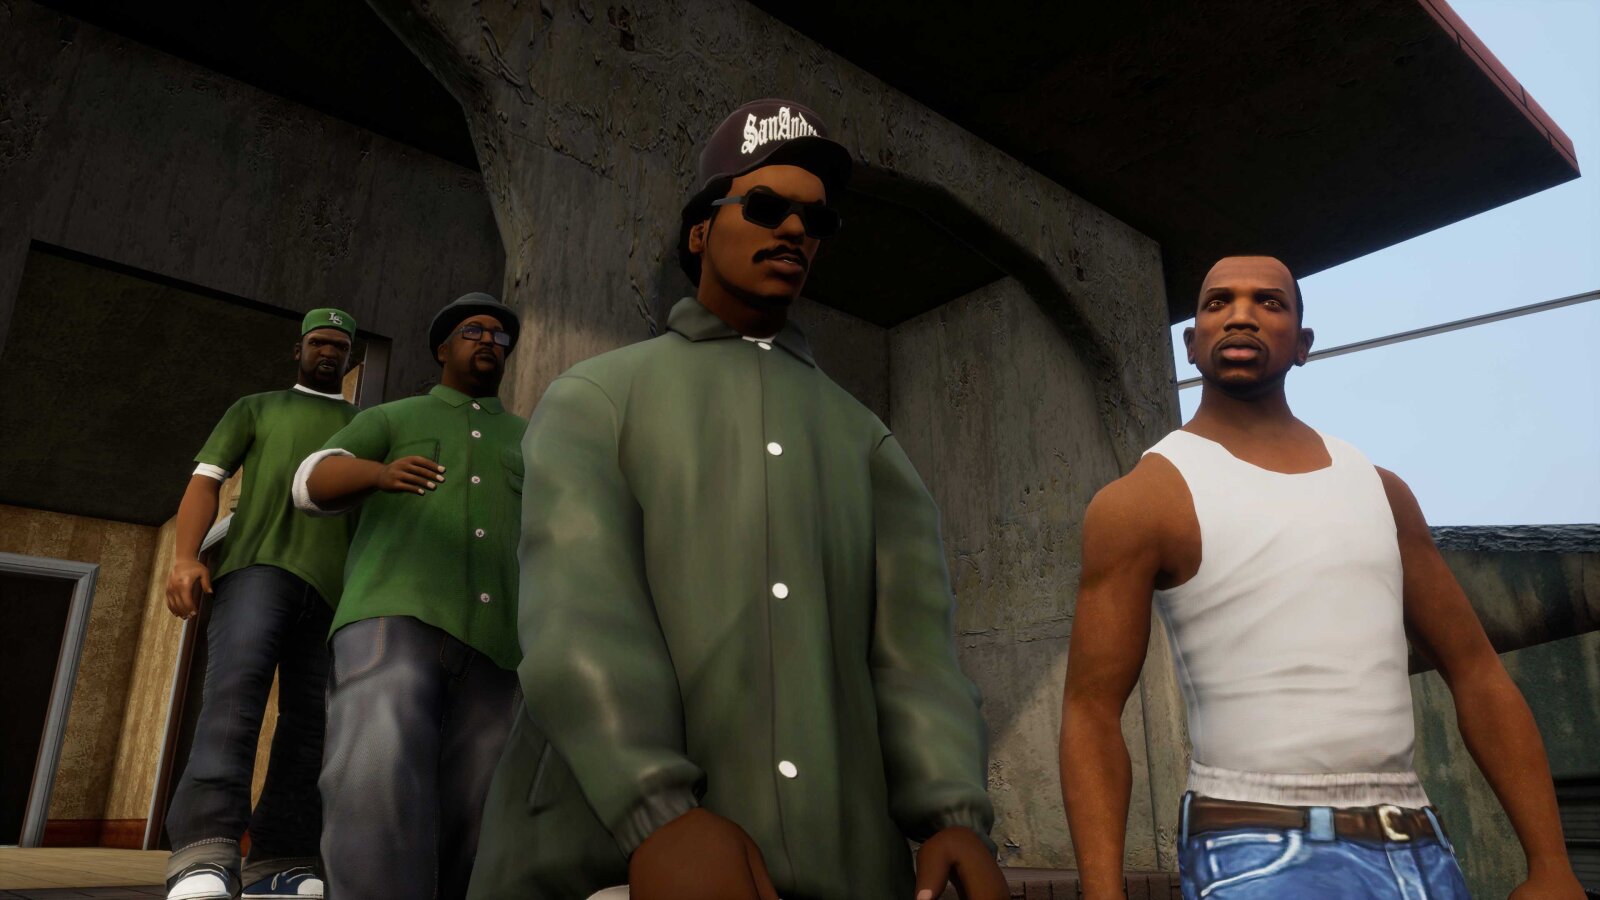 gta: GTA: The Trilogy: Check out how to play GTA 3, Vice City, and